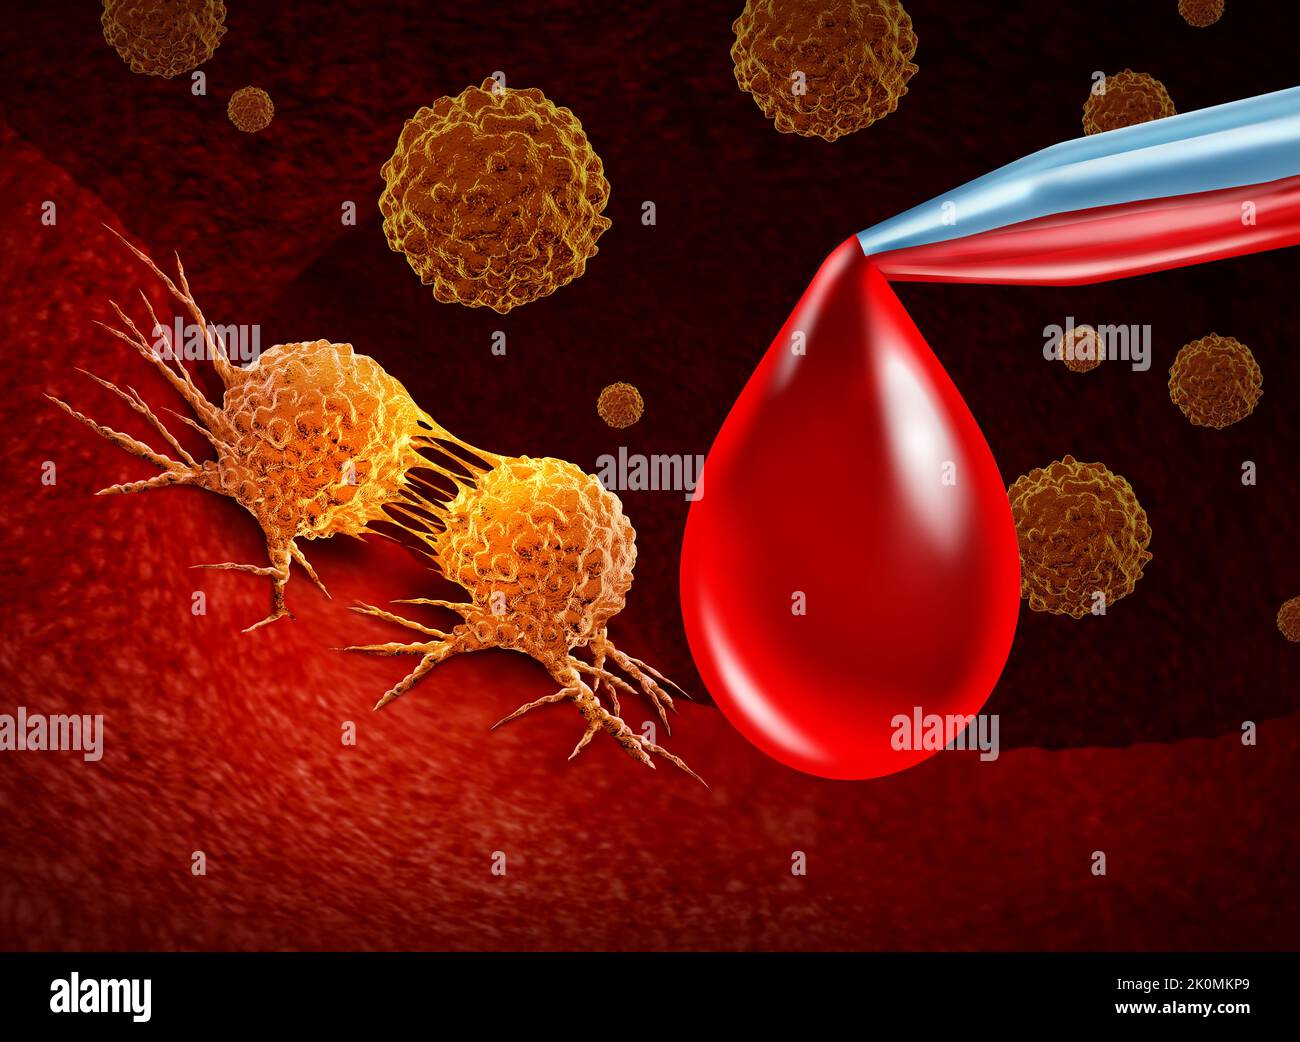 Cancer screening and blood test for early detection of malignant cells in a human body caused by carcinogens and genetics with a cancerous cell. Stock Photo